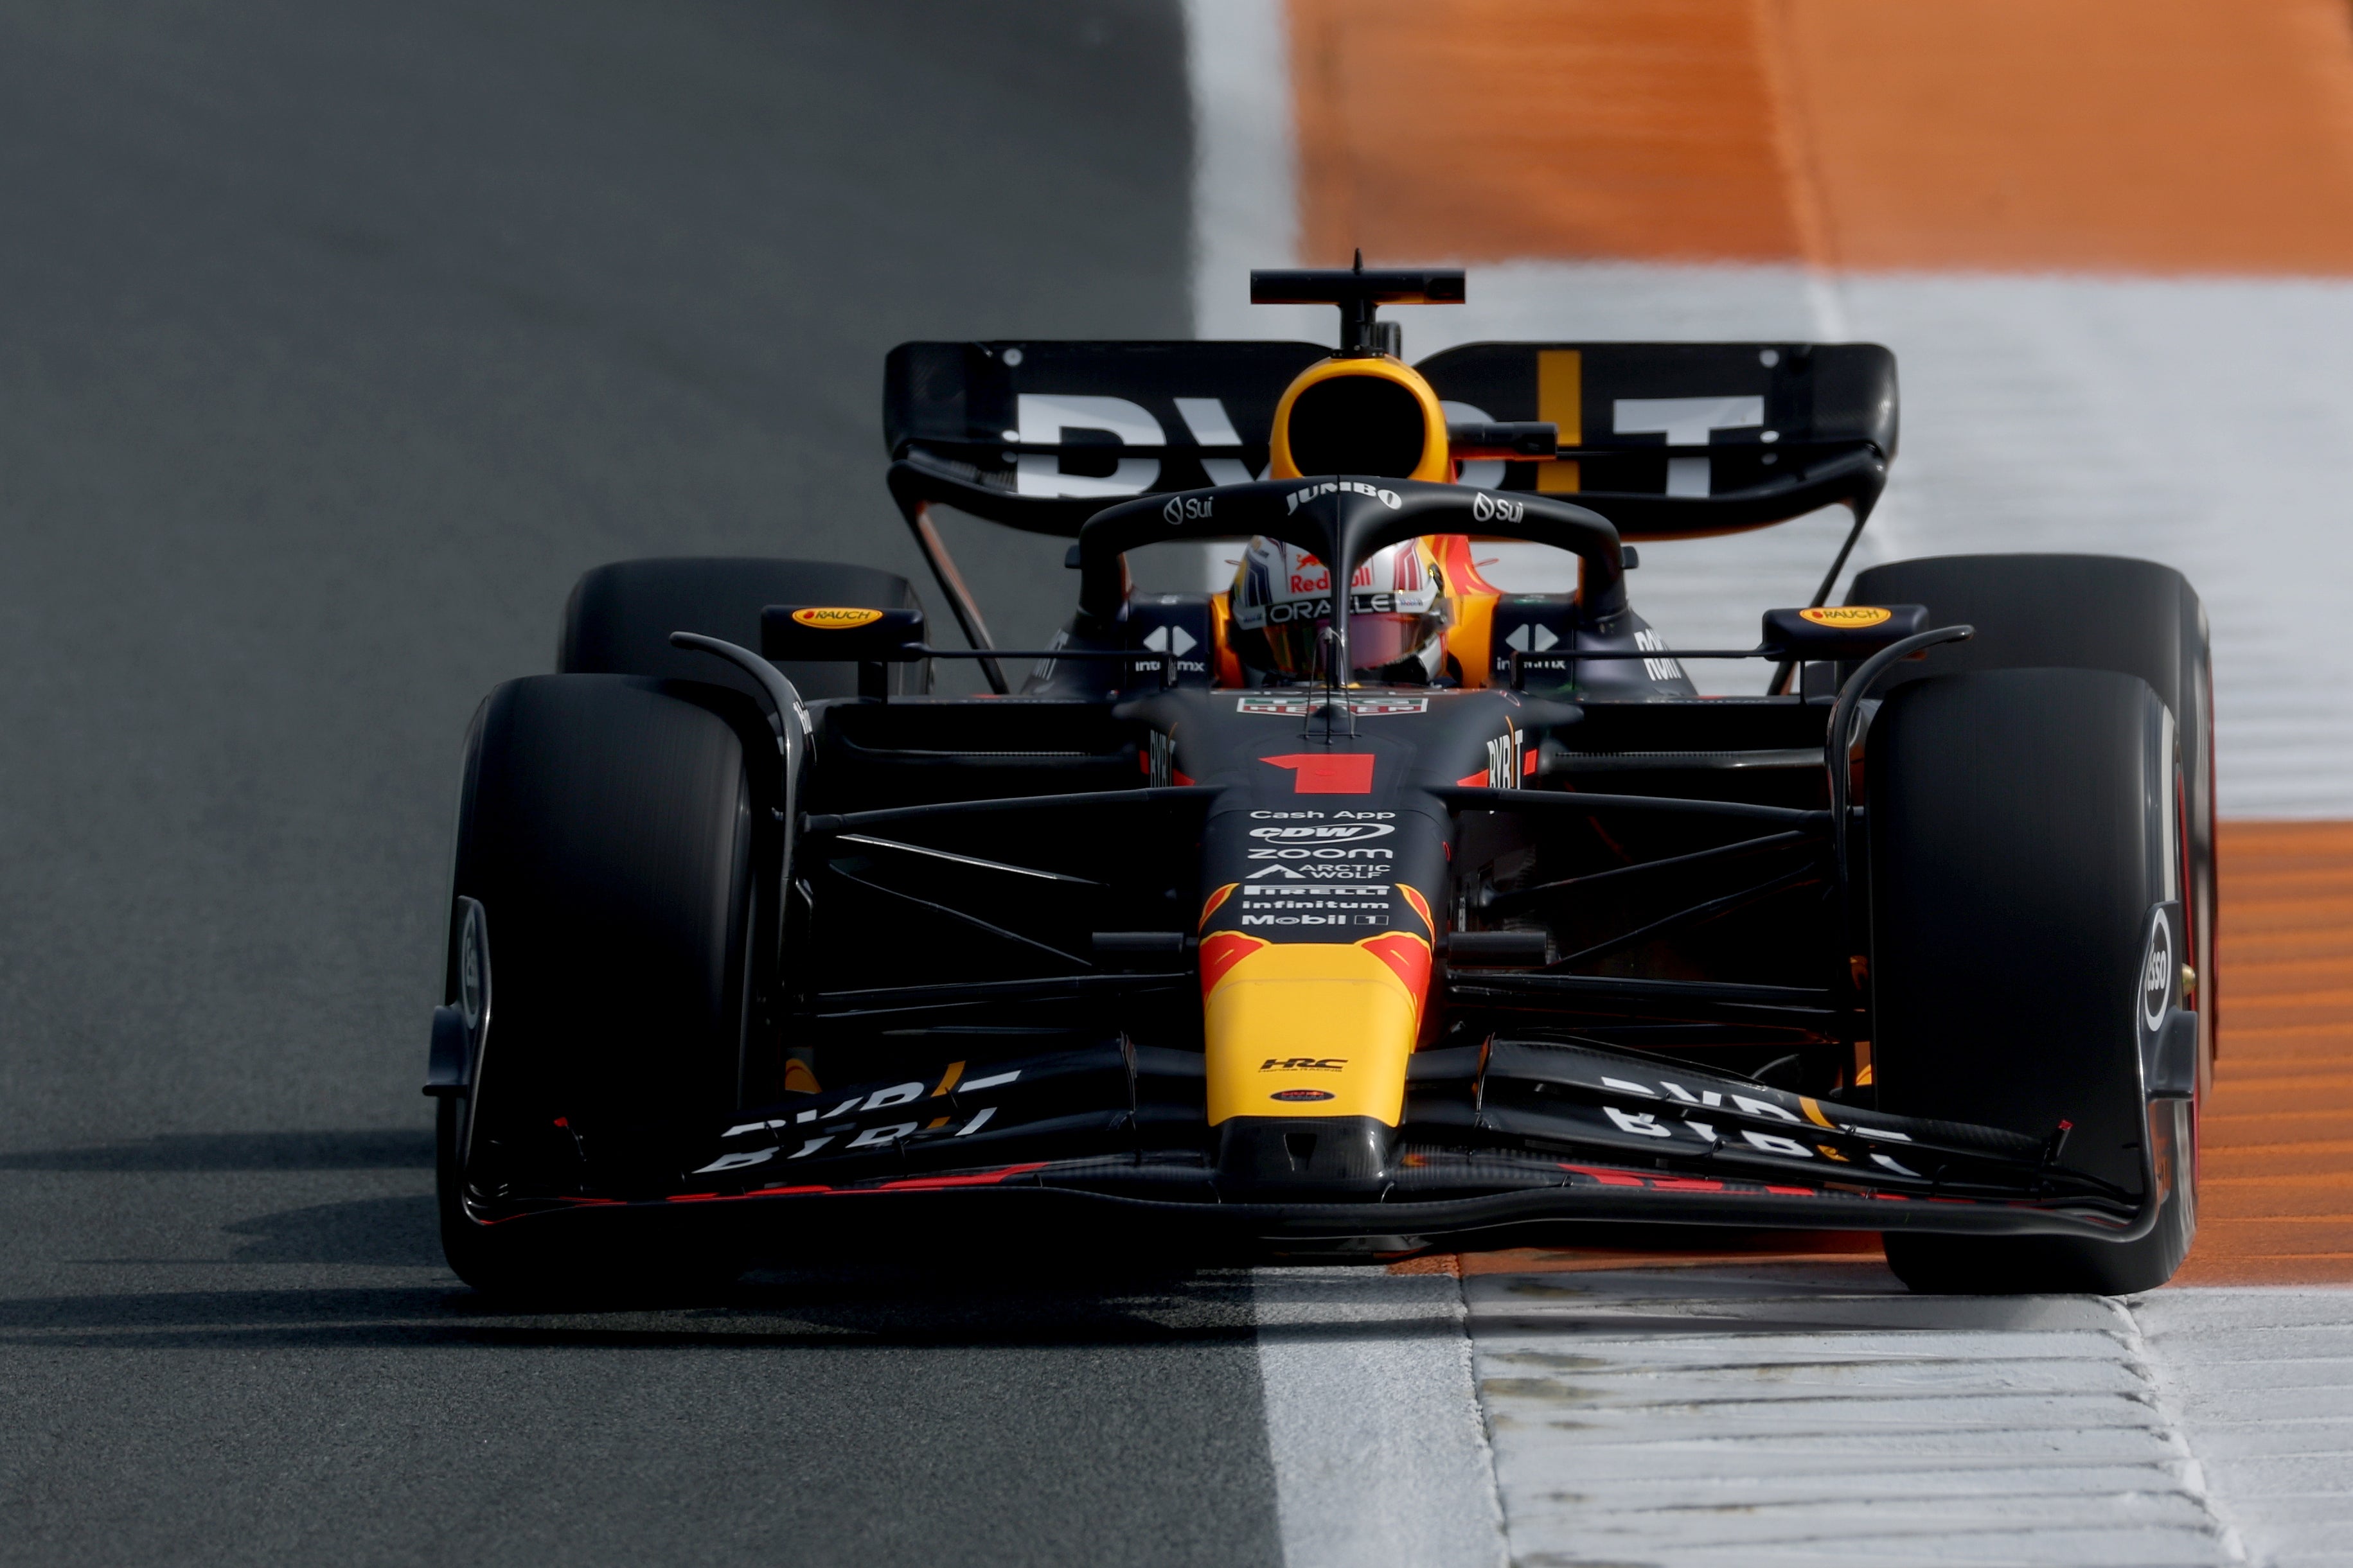 Max Verstappen posted the fastest time in first practice at Zandvoort